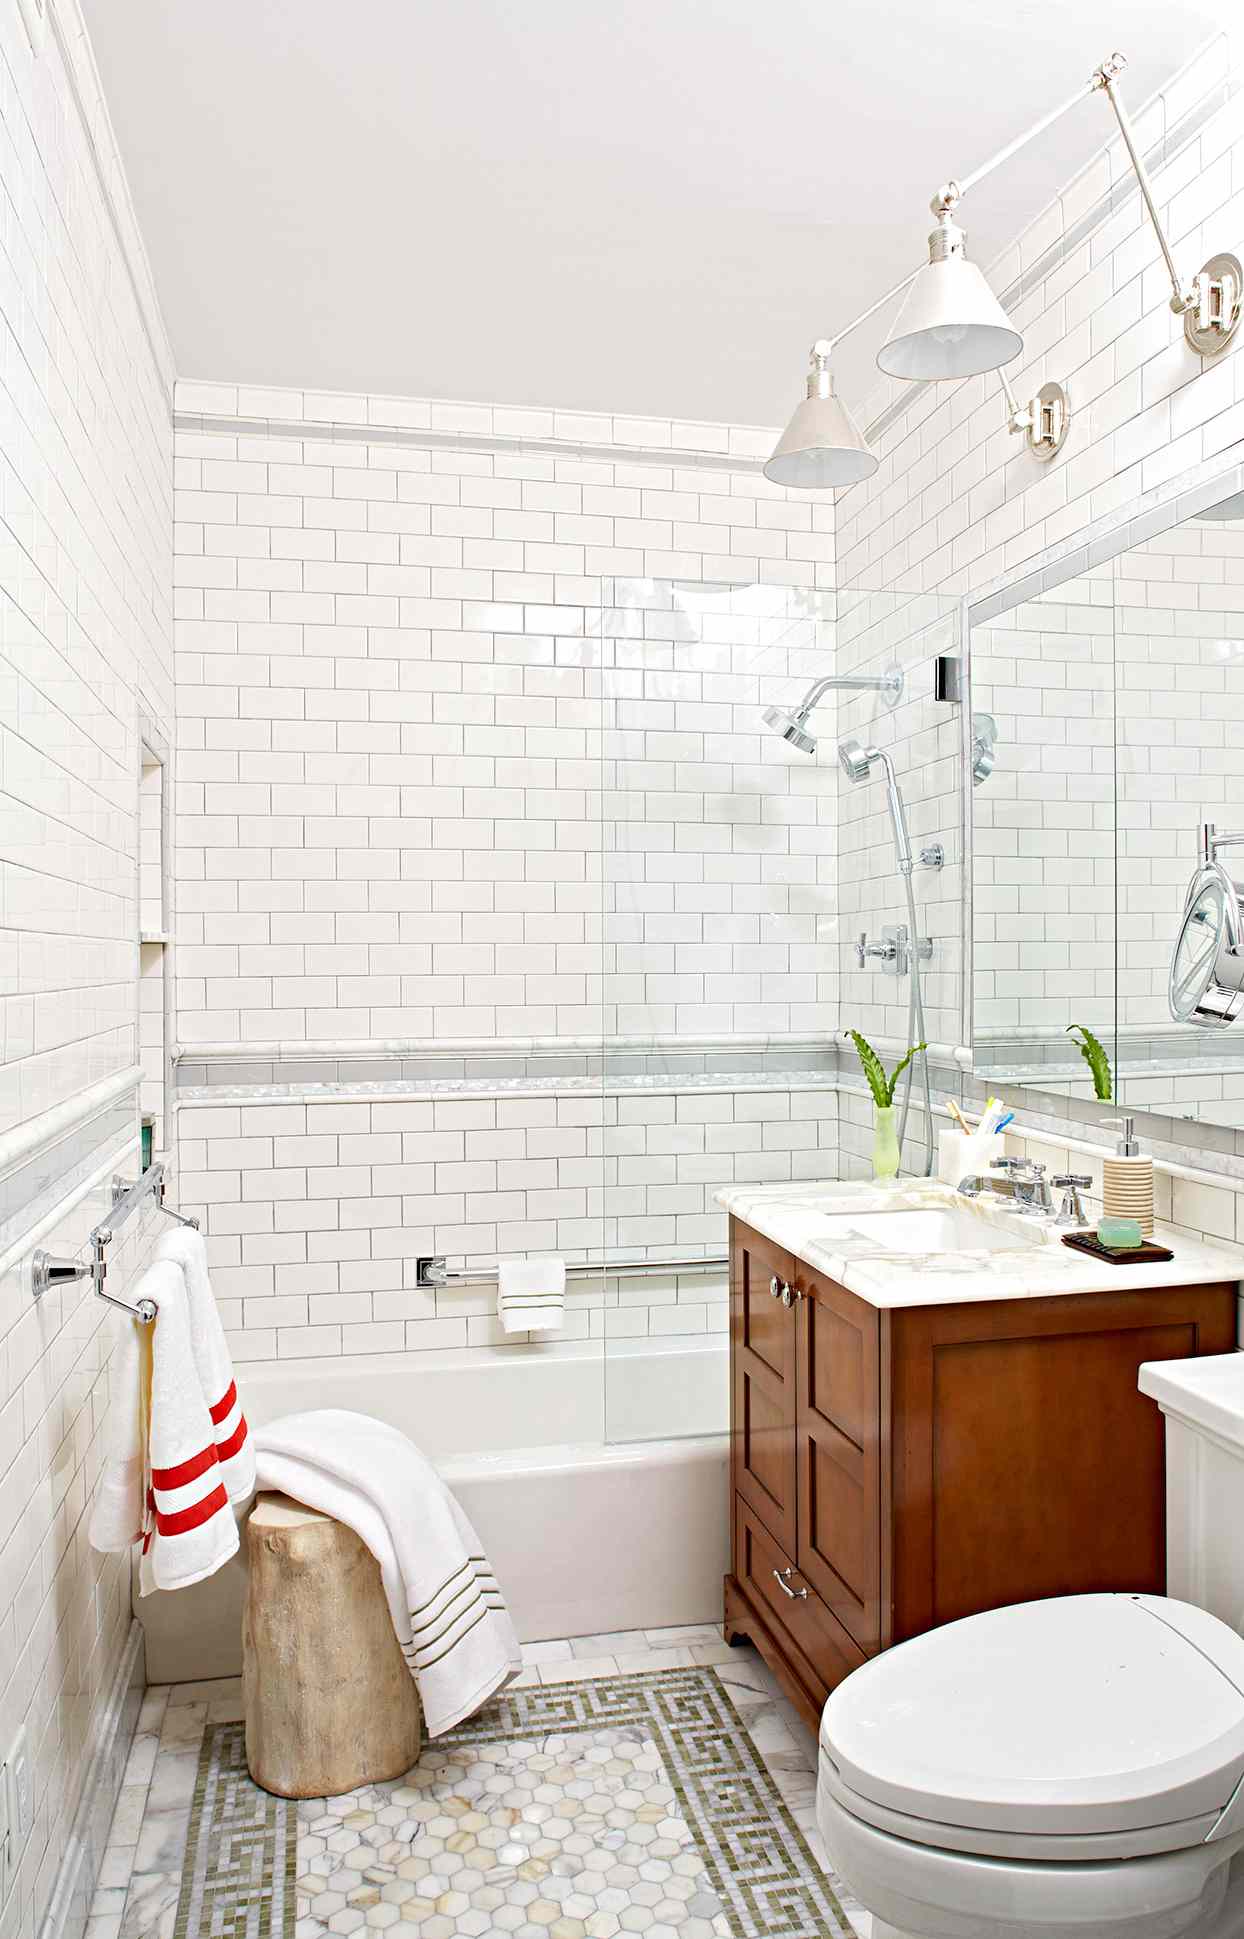 Tile A Shower Enclosure Or Tub Surround, How To Replace Tile In Bathroom Shower